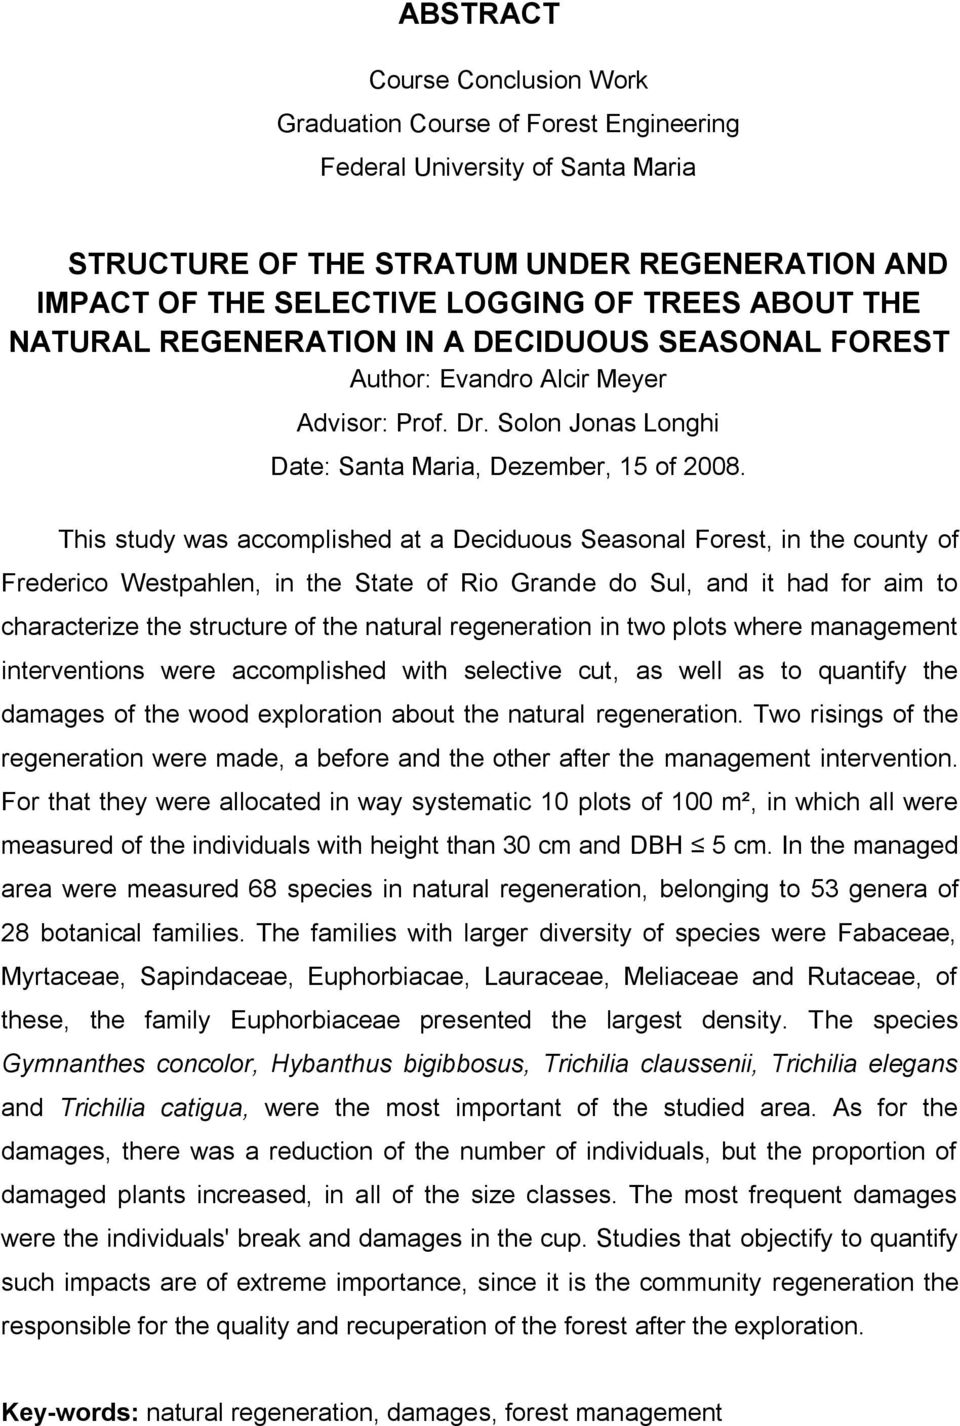 This study was accomplished at a Deciduous Seasonal Forest, in the county of Frederico Westpahlen, in the State of Rio Grande do Sul, and it had for aim to characterize the structure of the natural